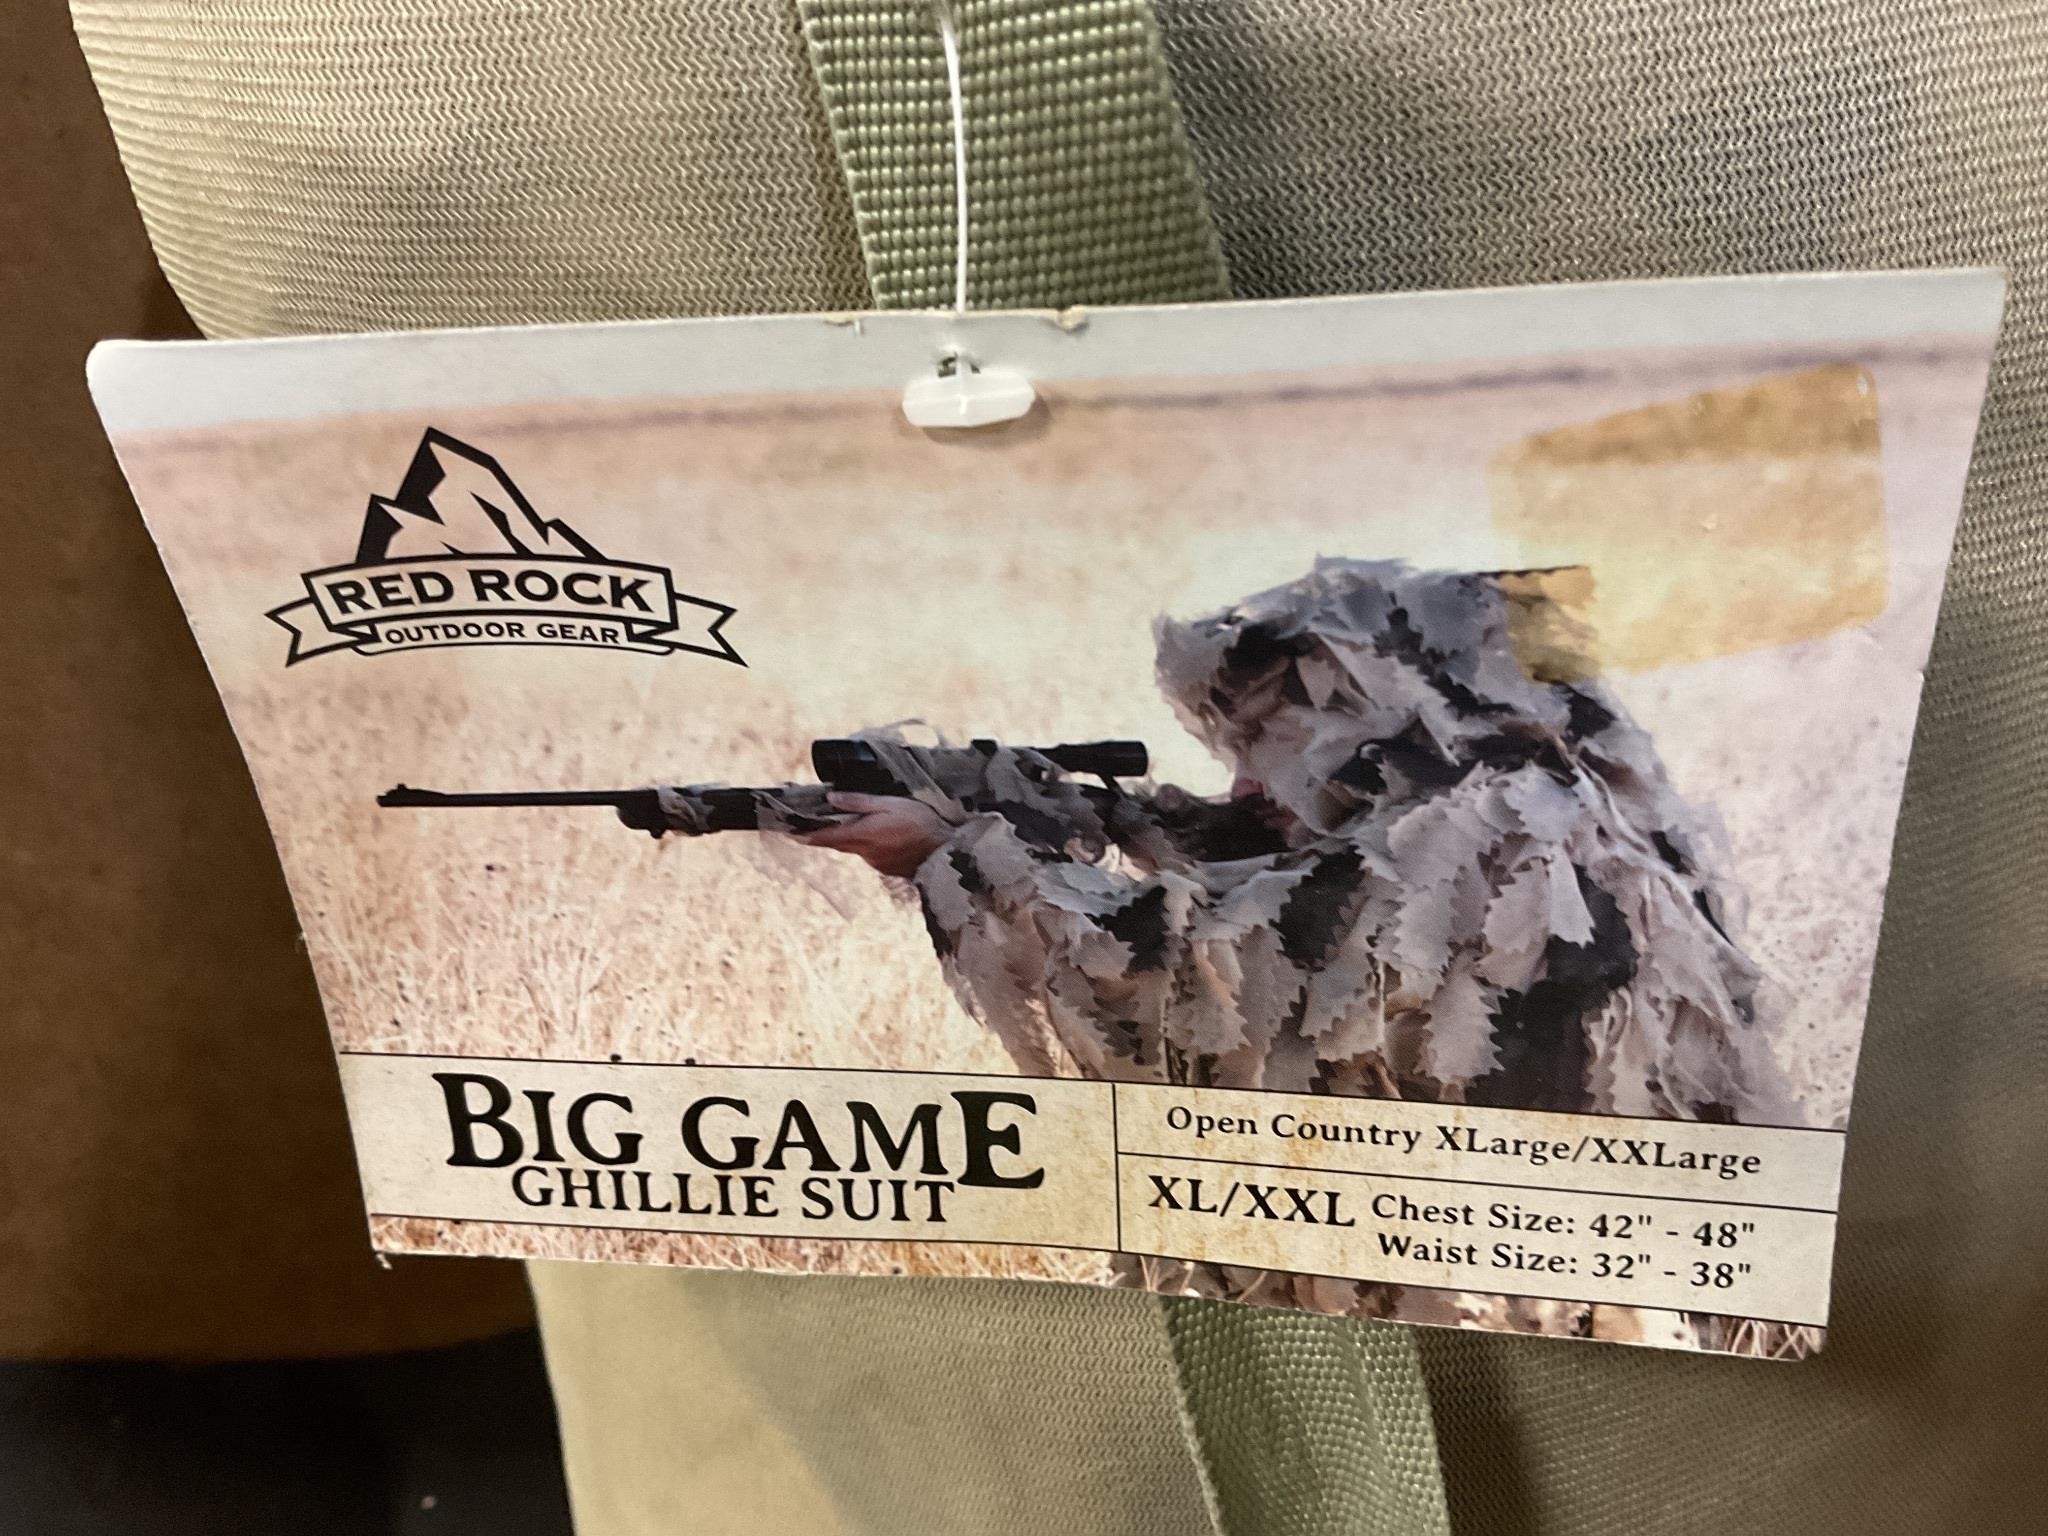 Red rock Big Game Ghillie Suit xl/xxlarge